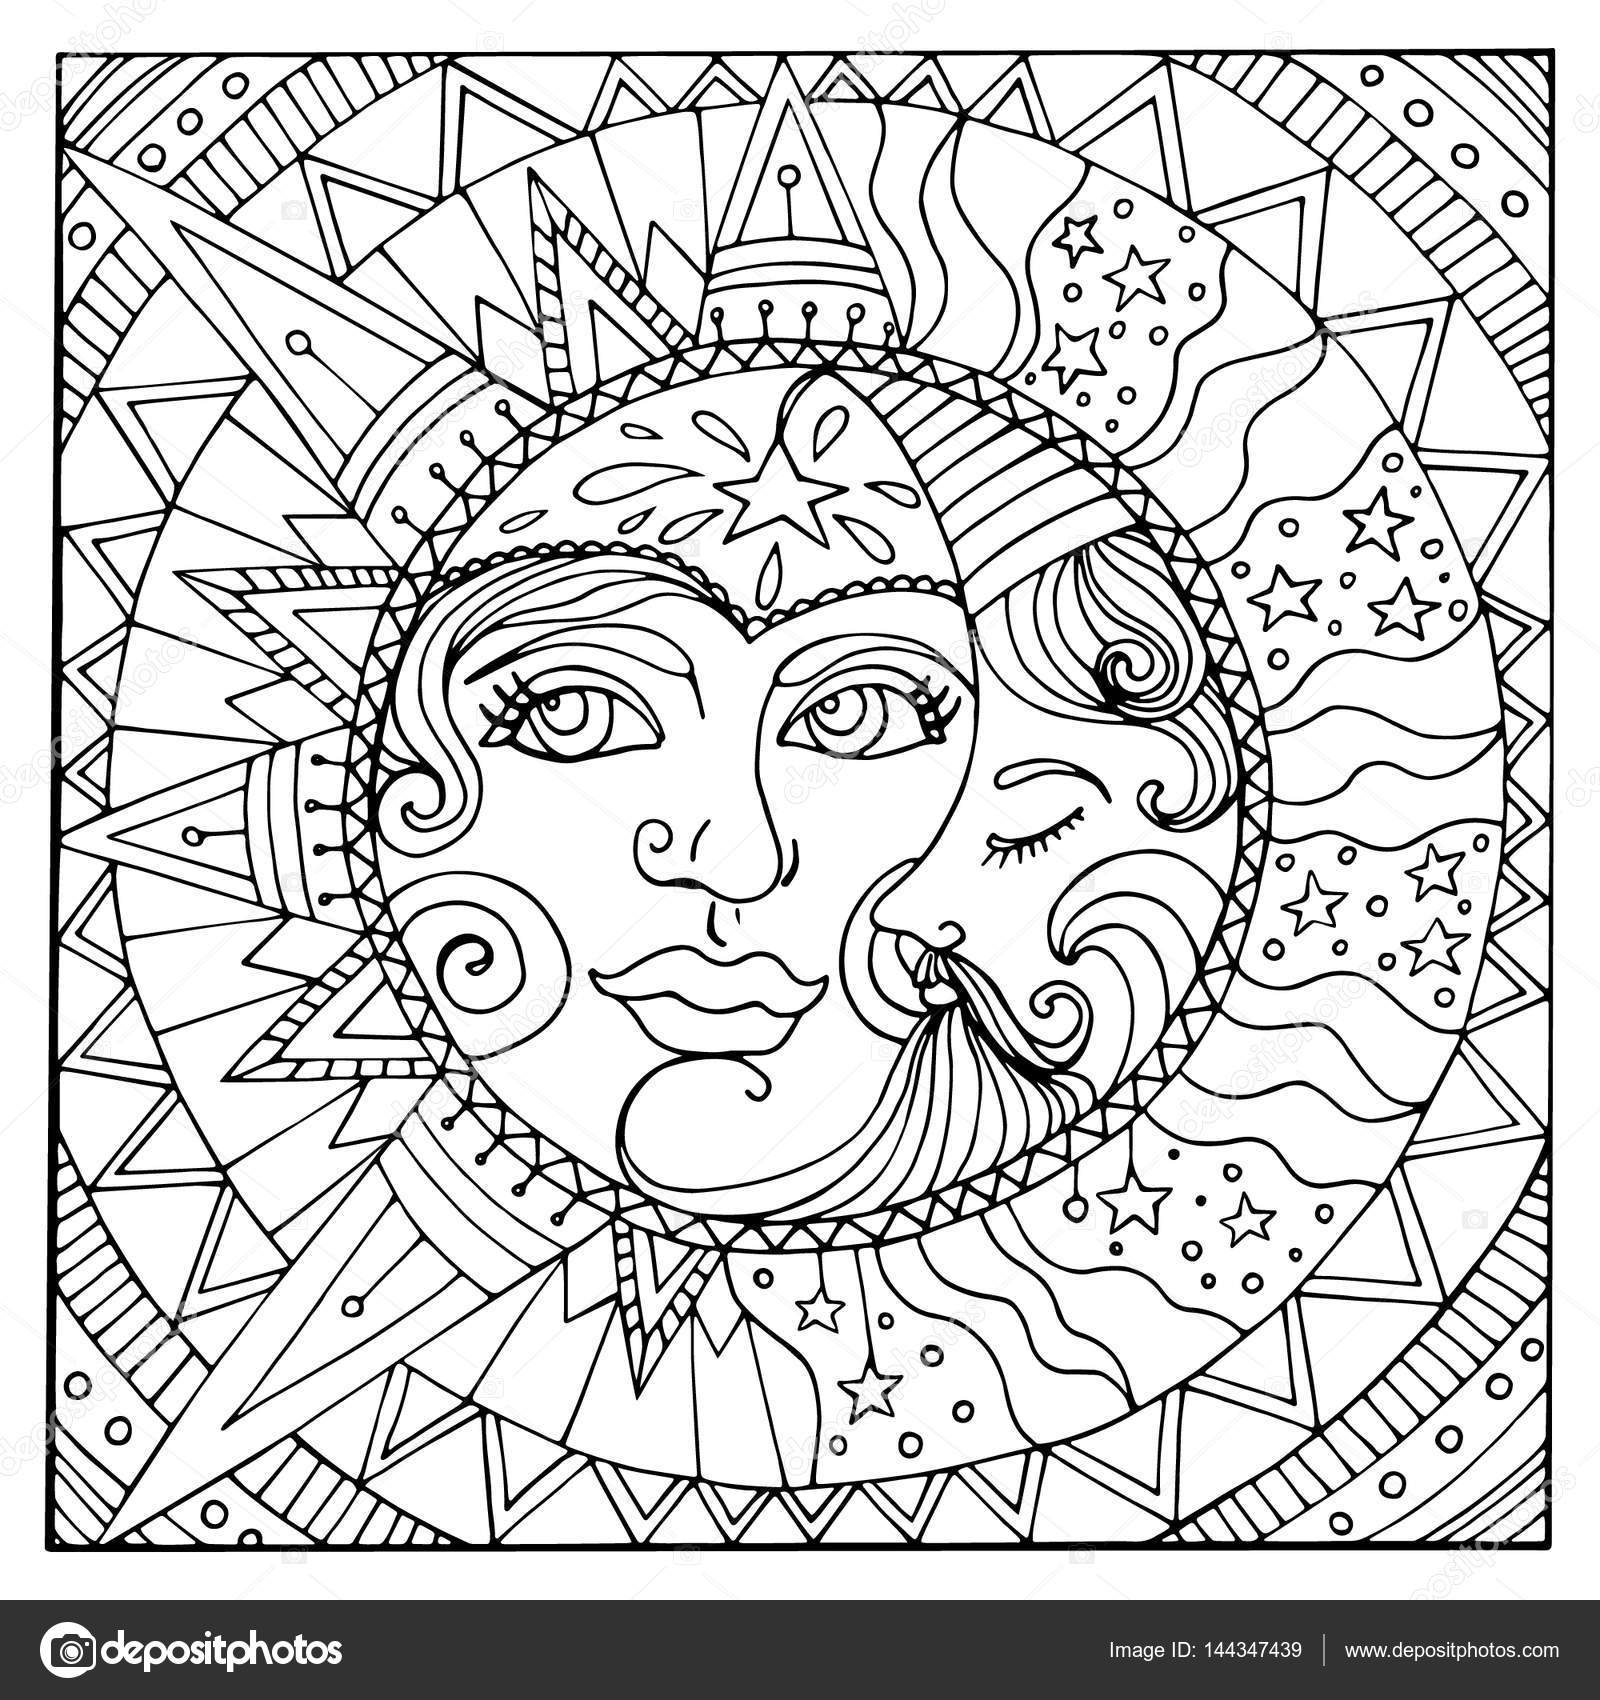 Illustration of vintage stylized magic sun and moon. Hand drawn vector ...